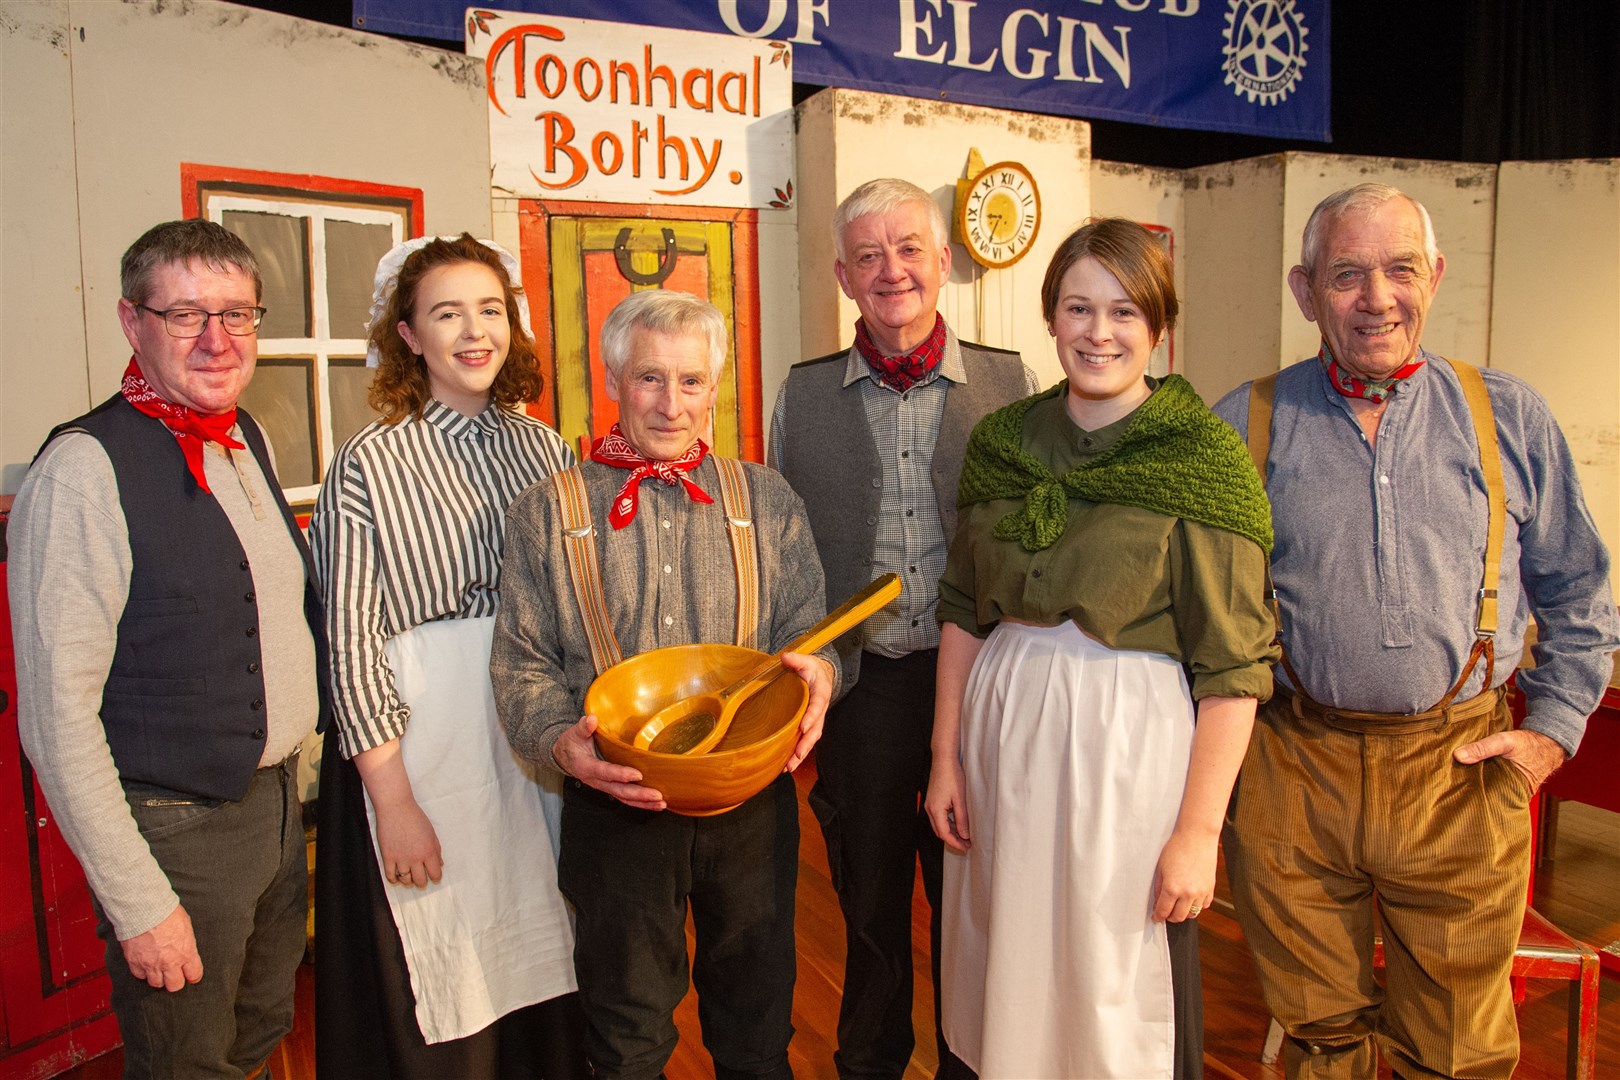 Left to Right - Allan Taylor from Alford, Ellie Beaton from Rothienorman, Hector Riddle from Finzean, Doug Hay from Whitehills, Shona Donaldson from Tarland and Joe Aitken from Kirriemuir.